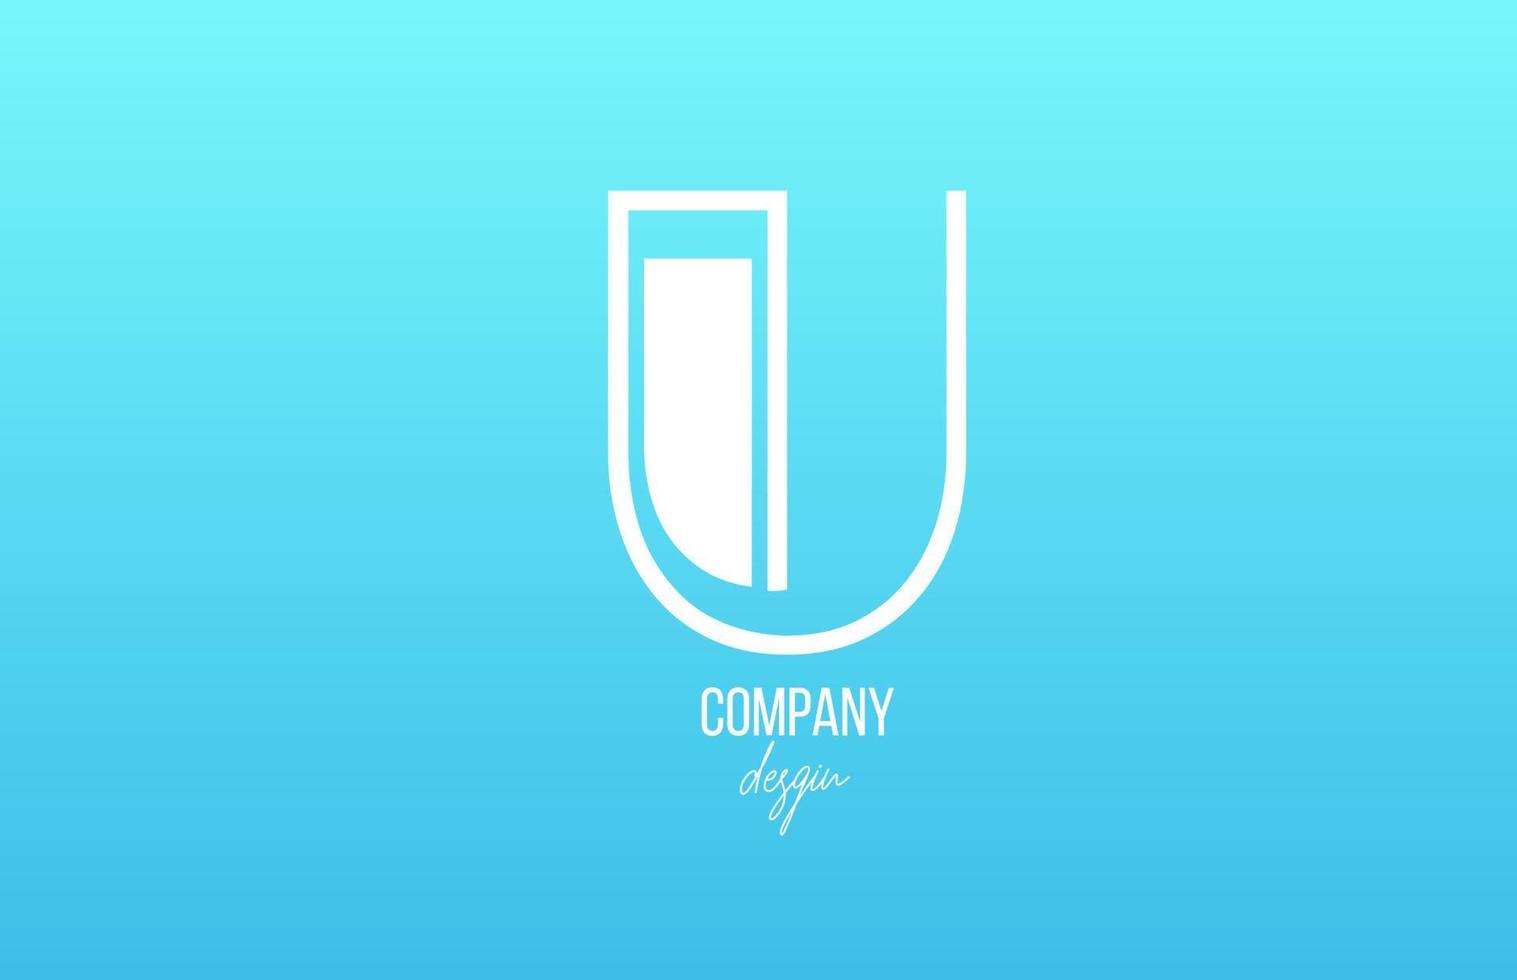 blue white U alphabet letter logo icon with line design for business and company vector